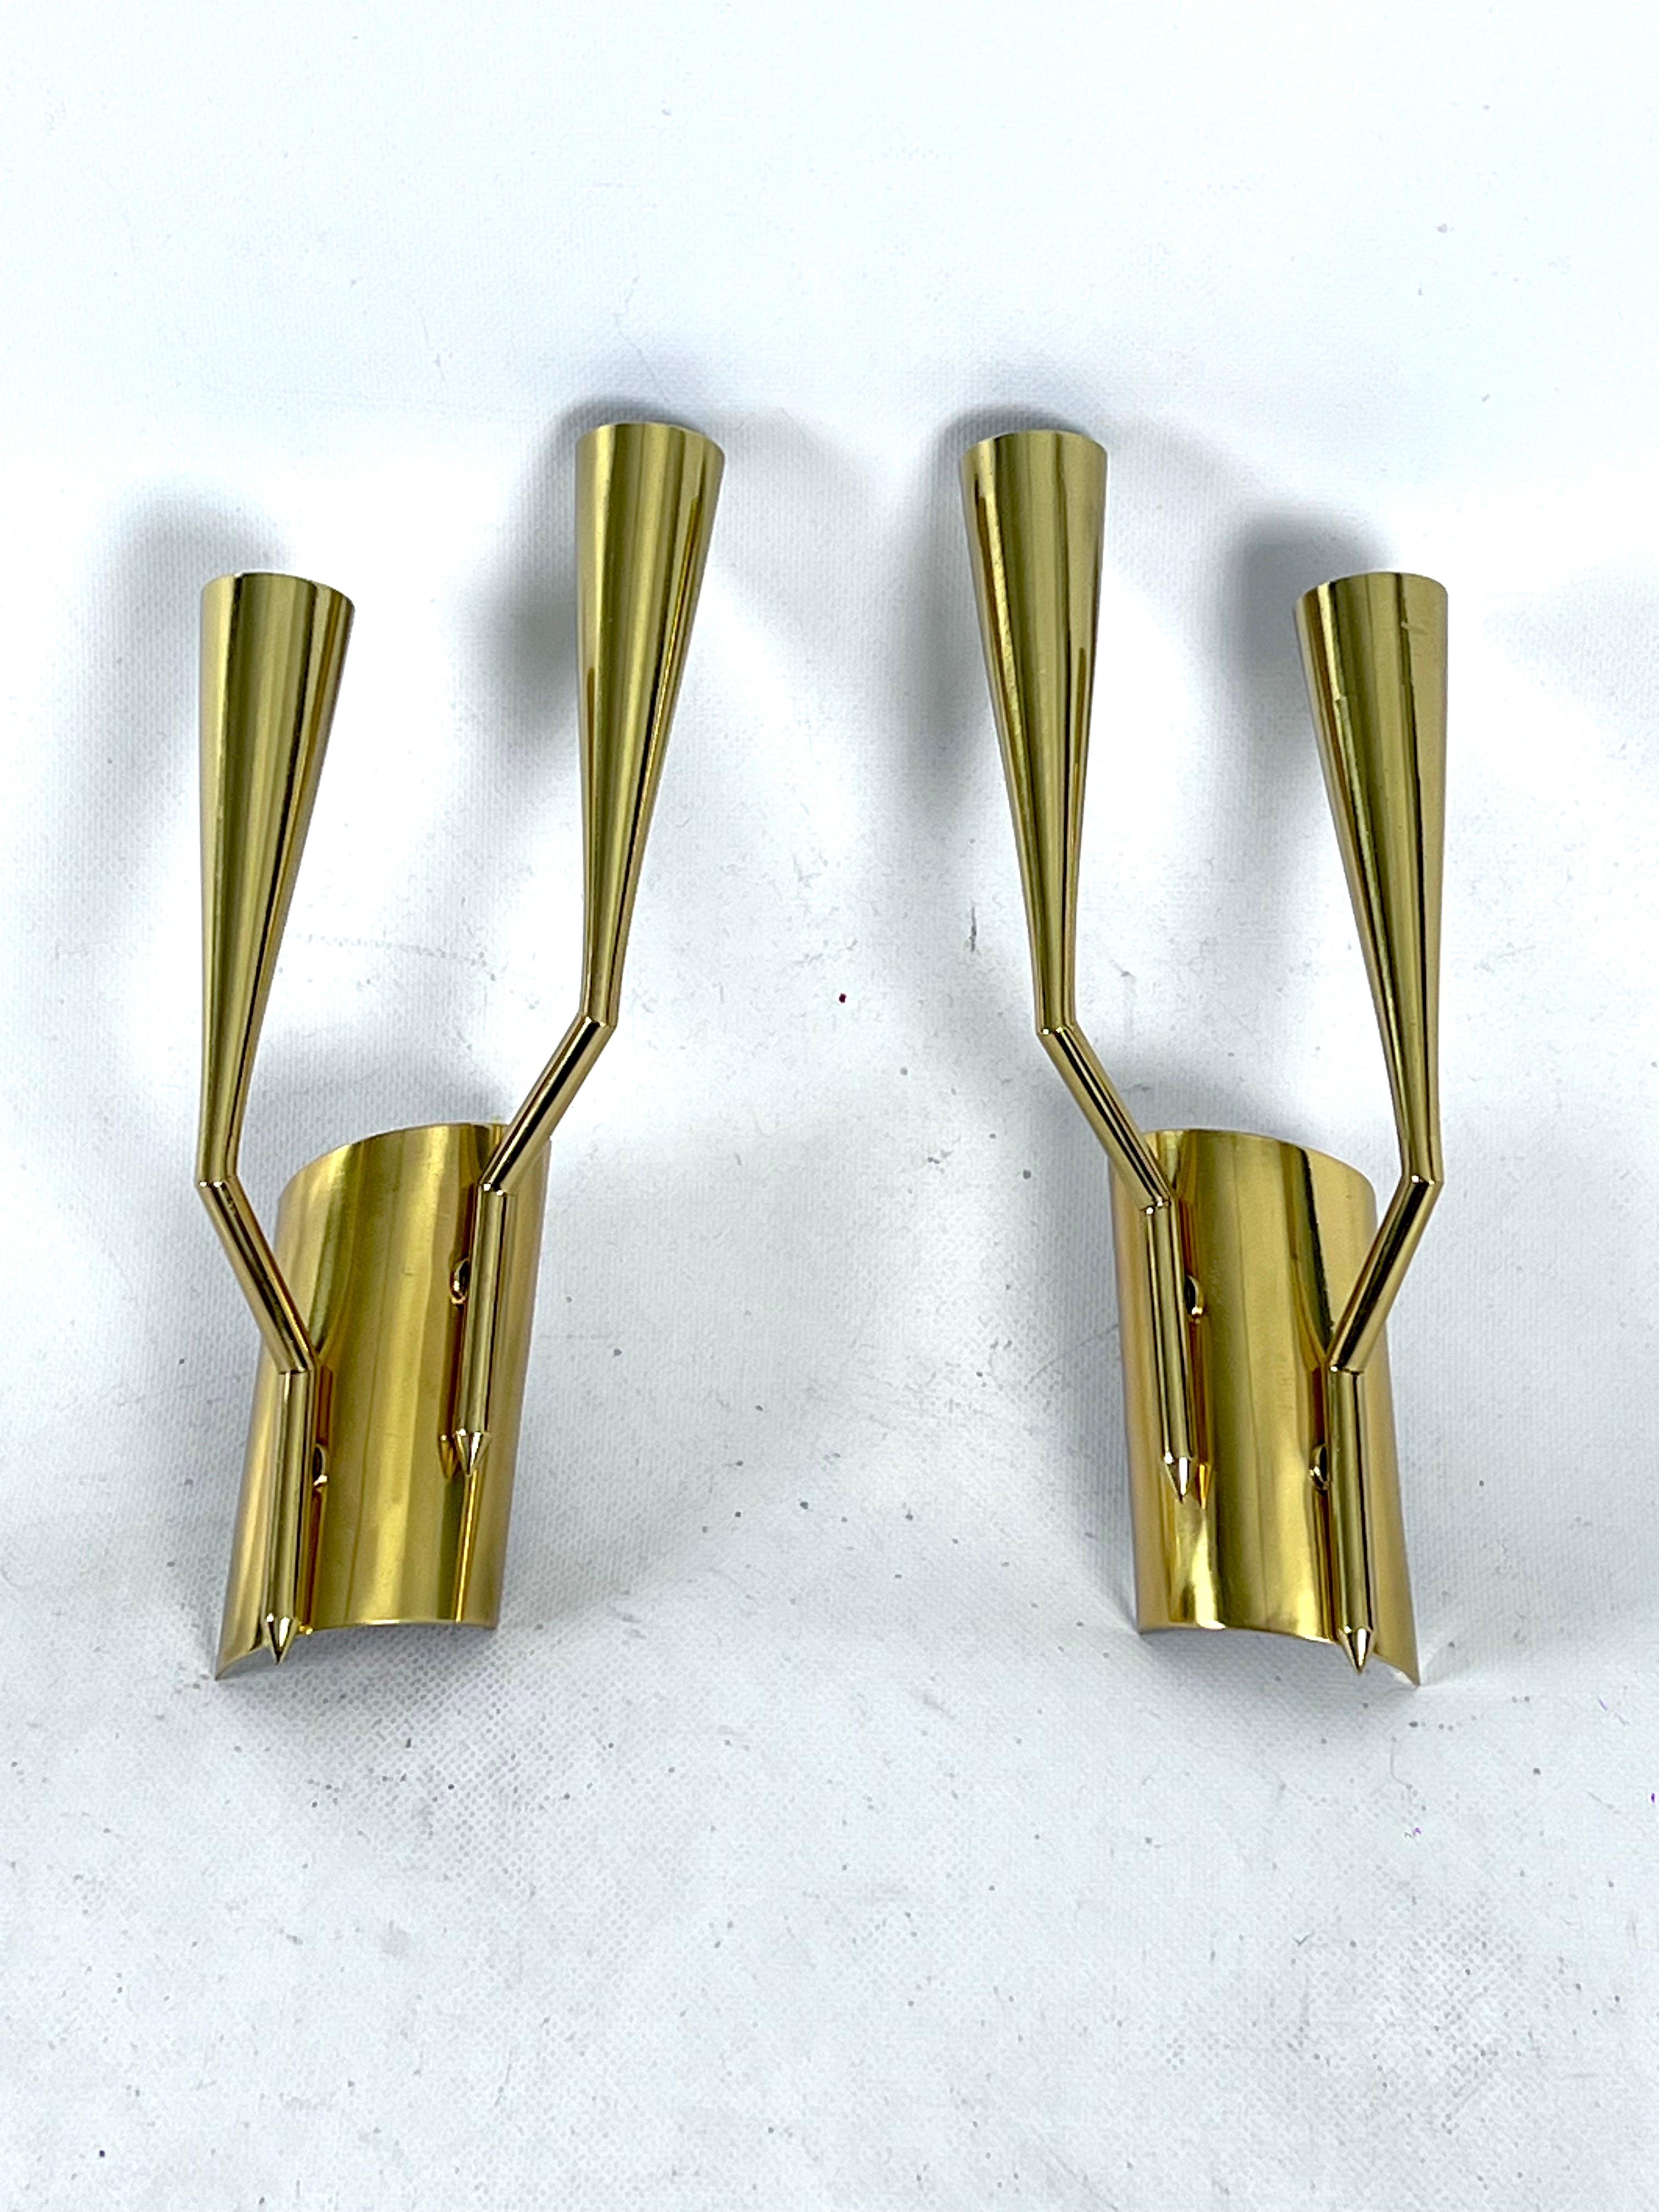 Great condition for this set of two sconces designed by Oscar Torlasco for Lumi Milano. Produced in Italy during the 1950s. Full working with EU standard, adaptable on demand for USA standard.

